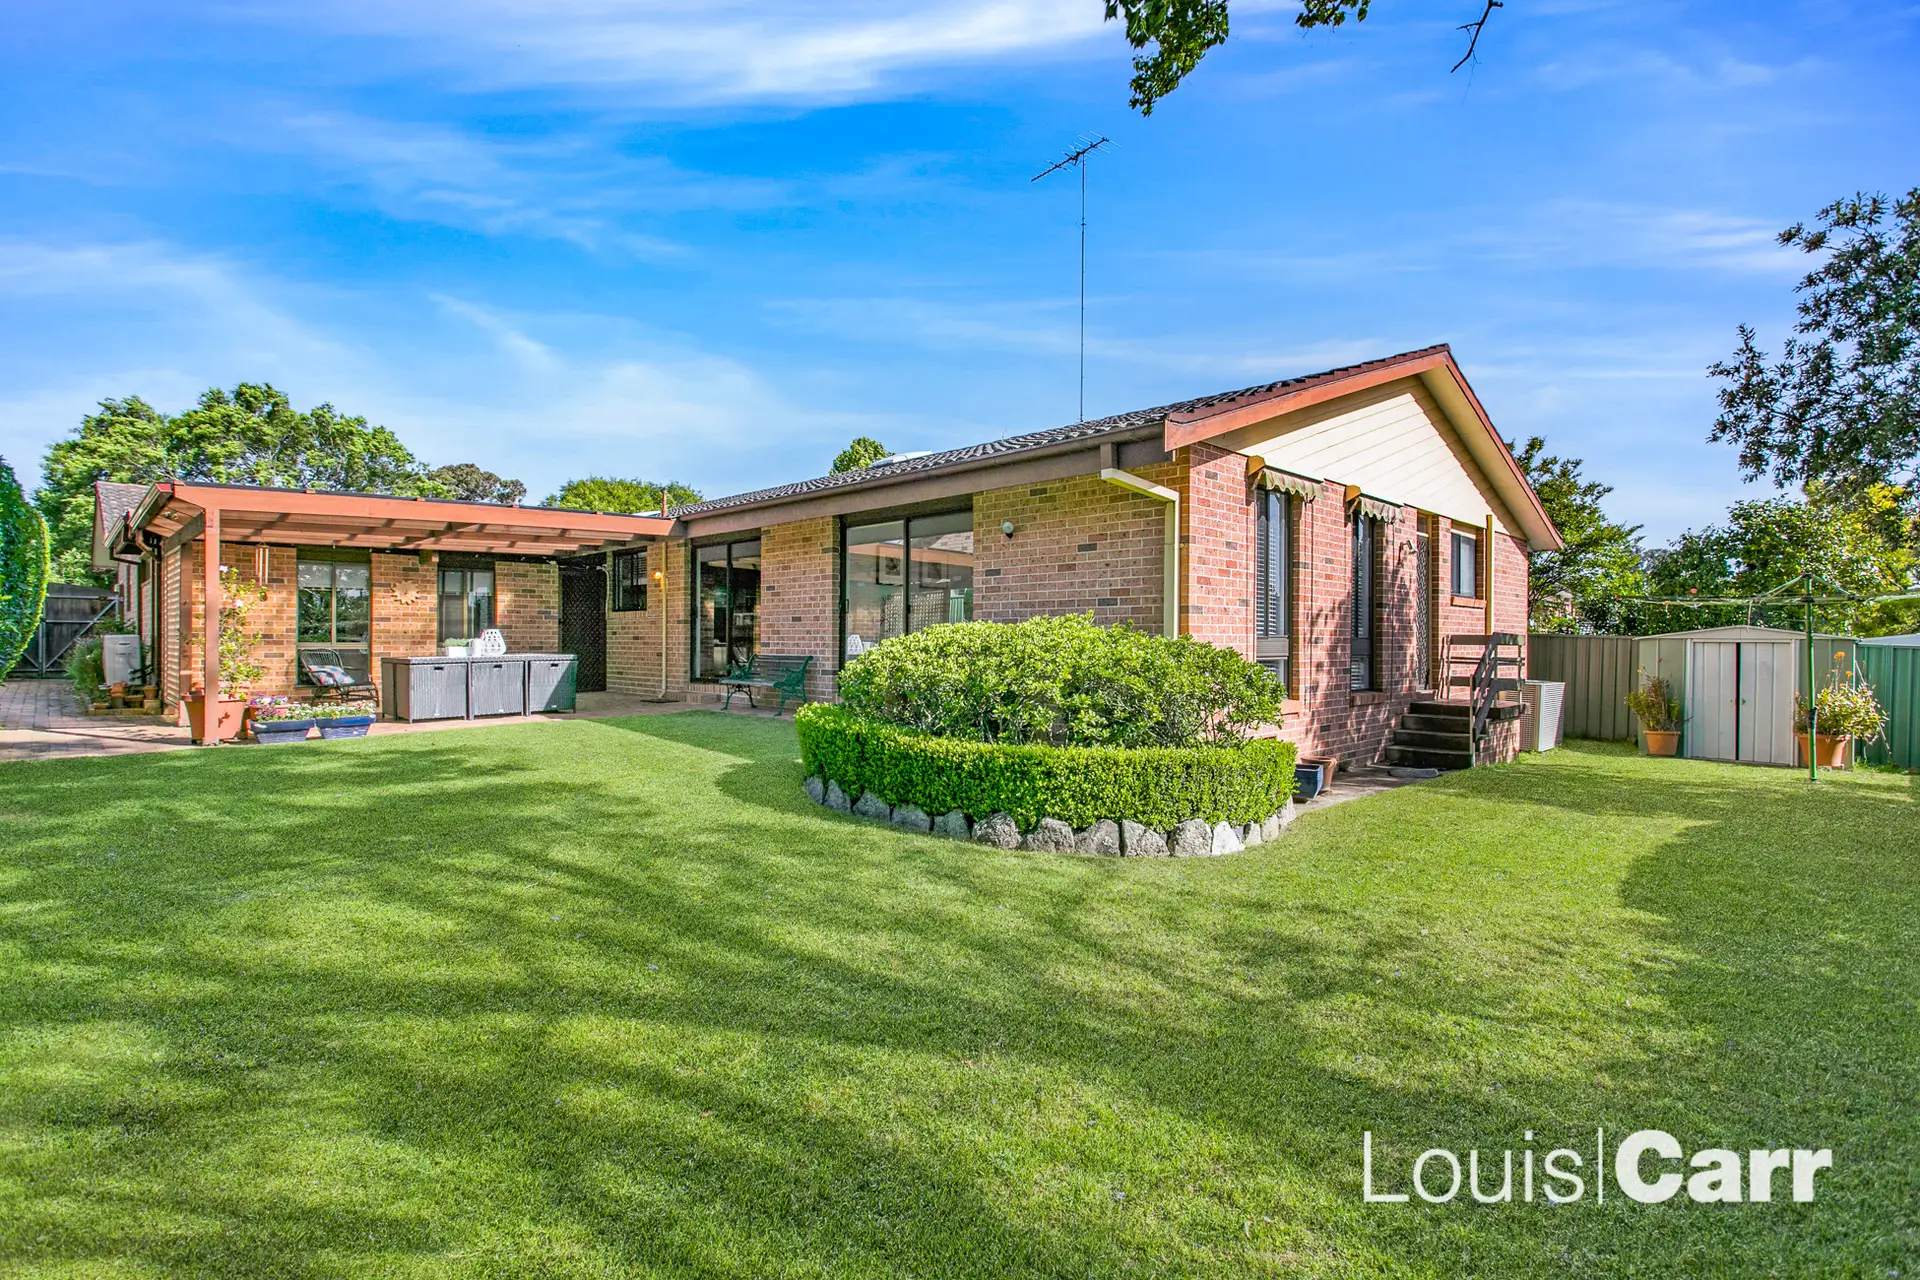 Photo #4: 11 Kentia Parade, Cherrybrook - Sold by Louis Carr Real Estate